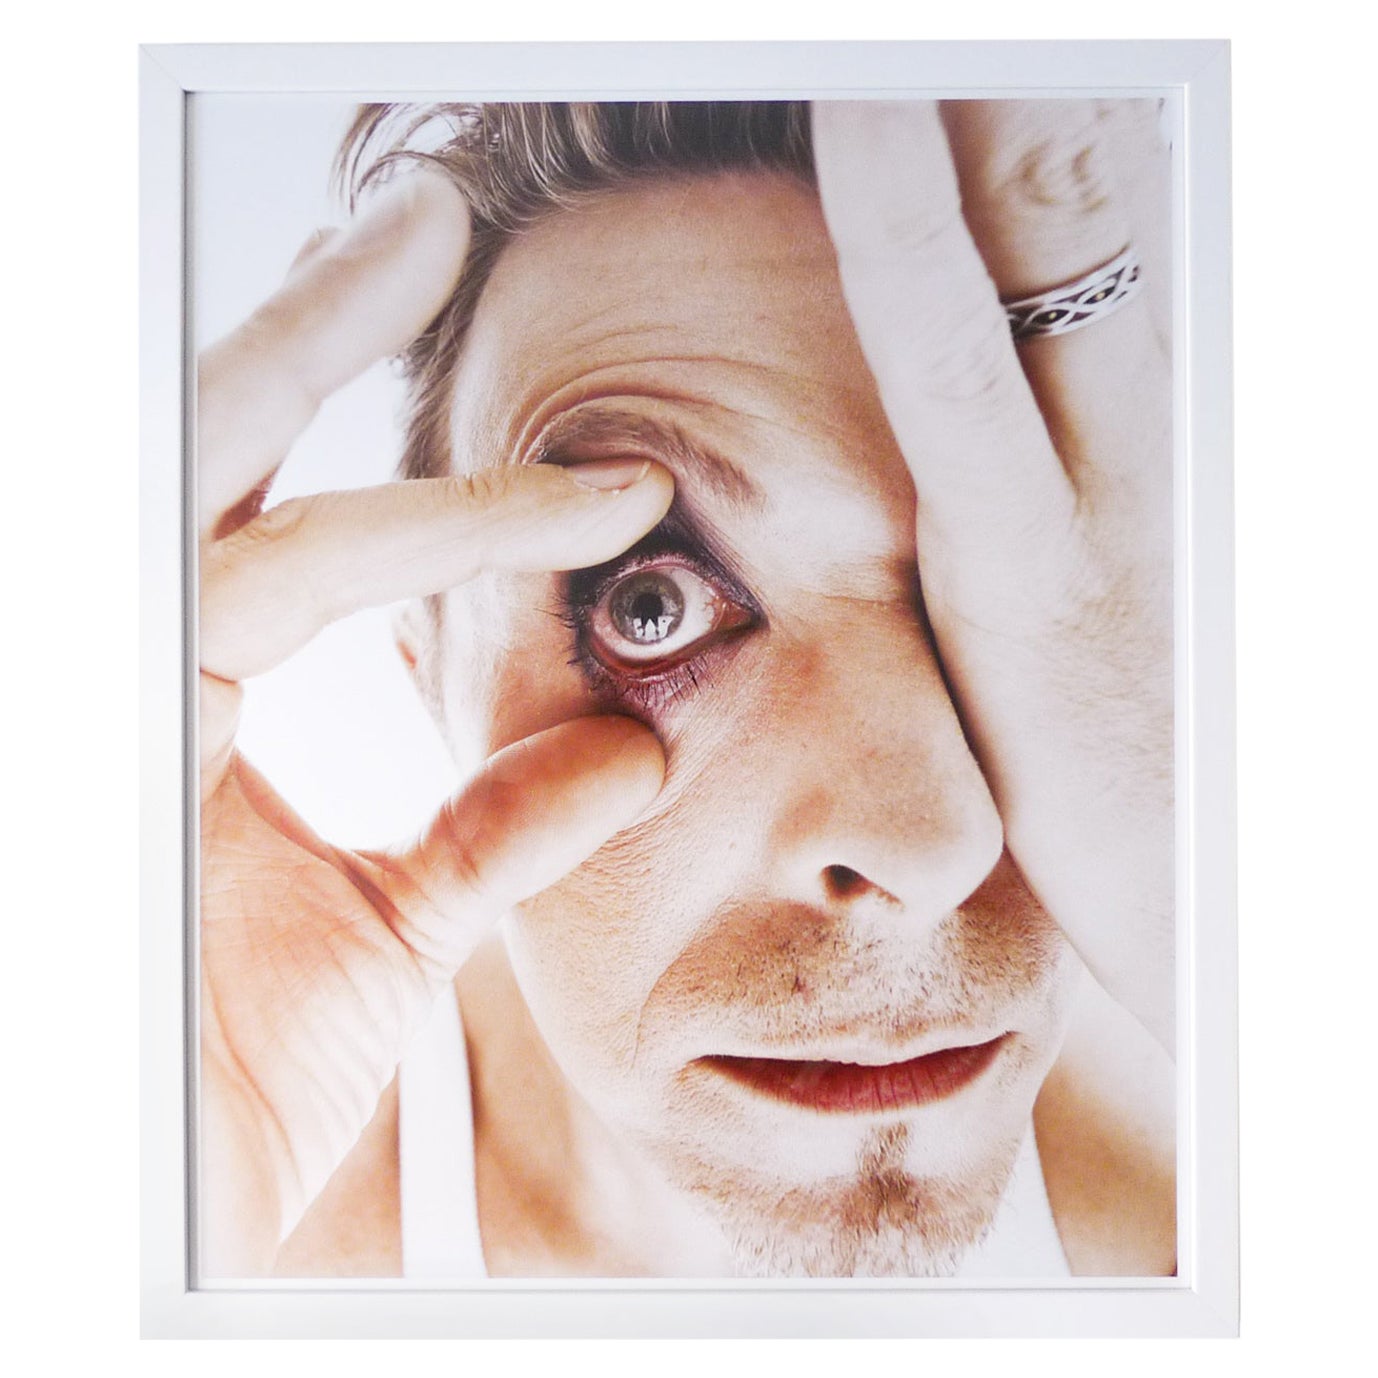 Limited Edition Signed “Bowie’s Eye" Print by Rankin, Dazed & Confused 1995